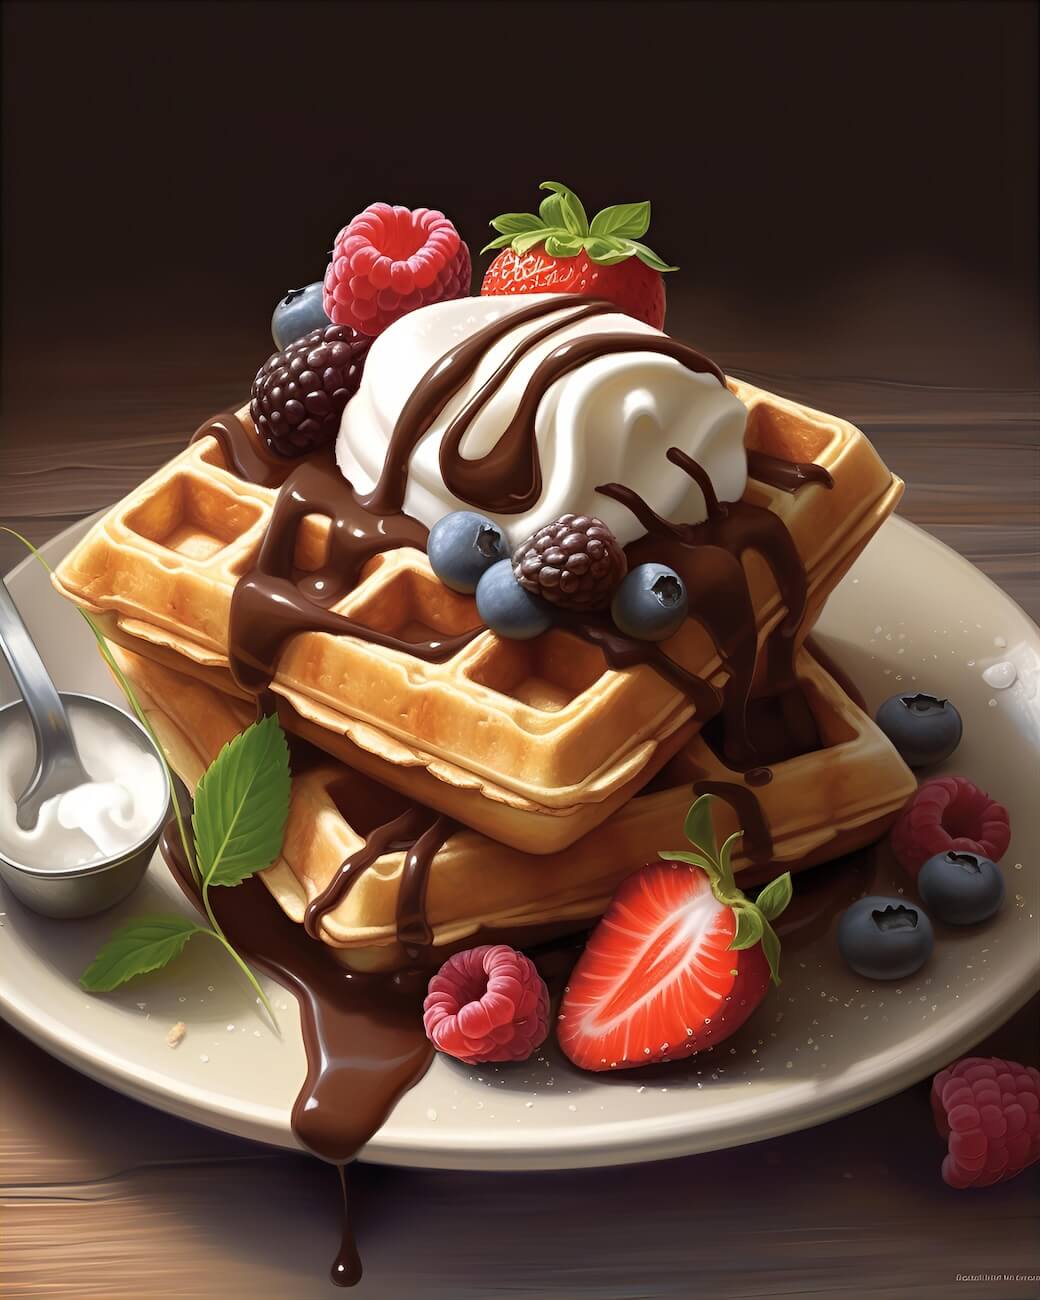 image-of-waffles-and-chocolate-on-a-plate